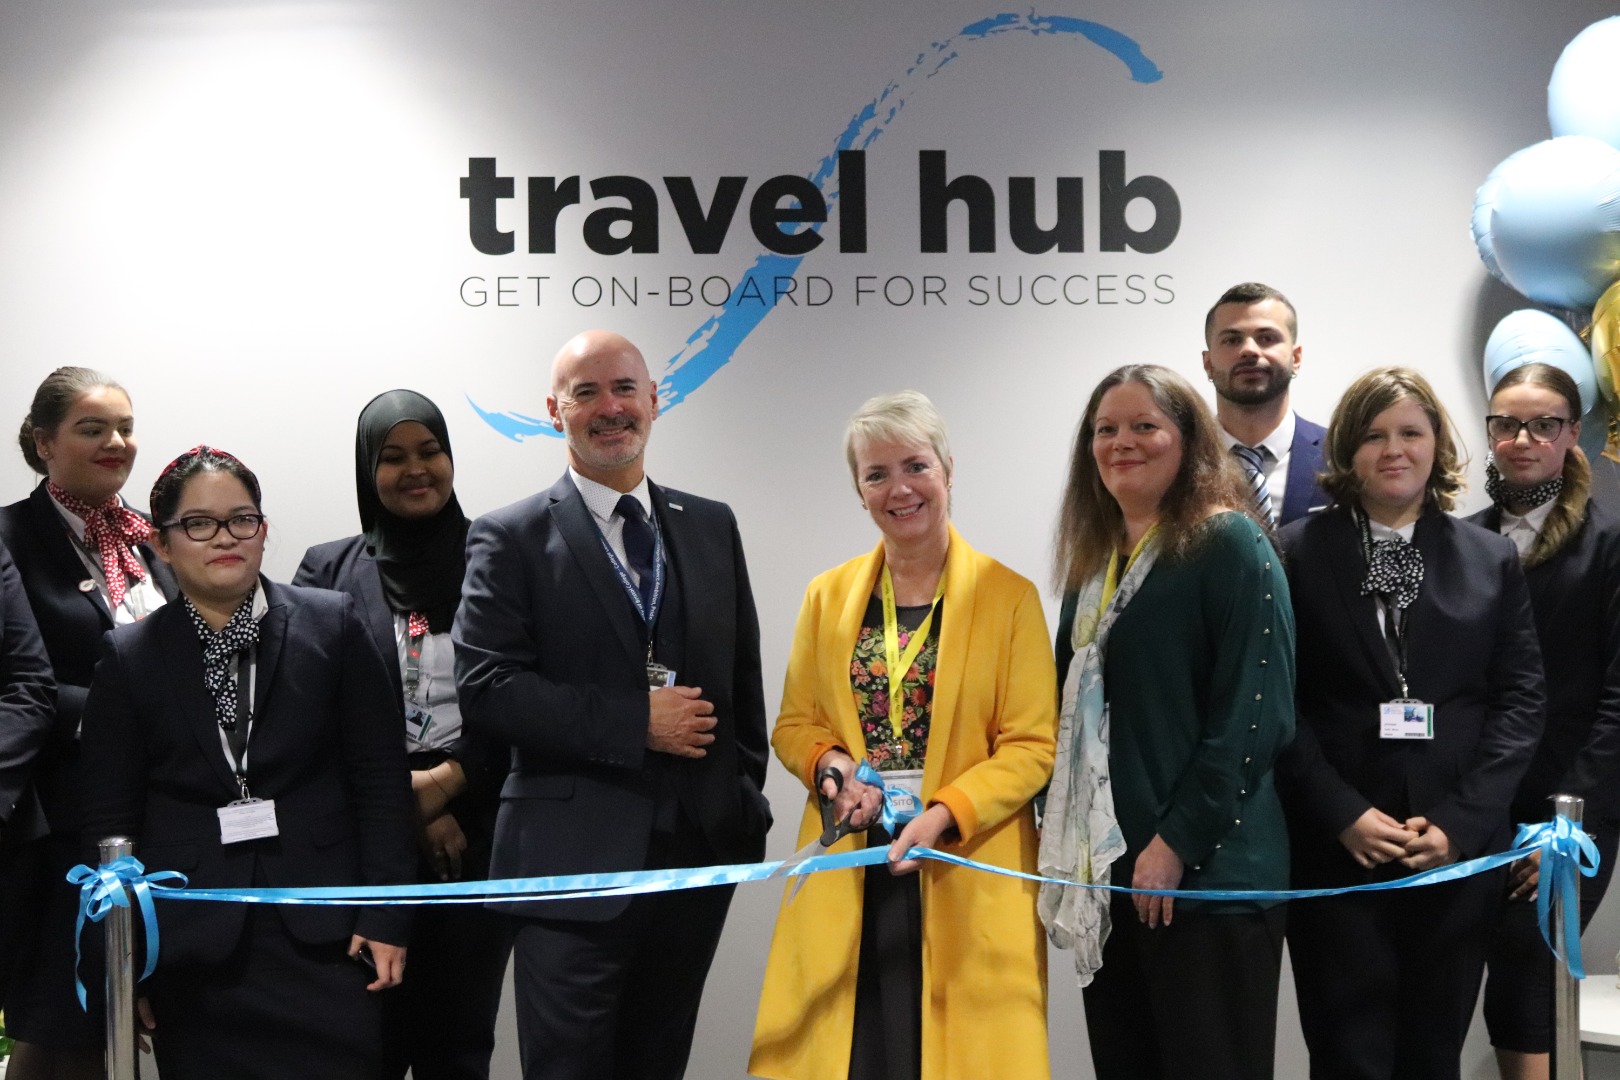 MP Karin Smyth cuts a ribbon for the travel hub. Students and staff are around her